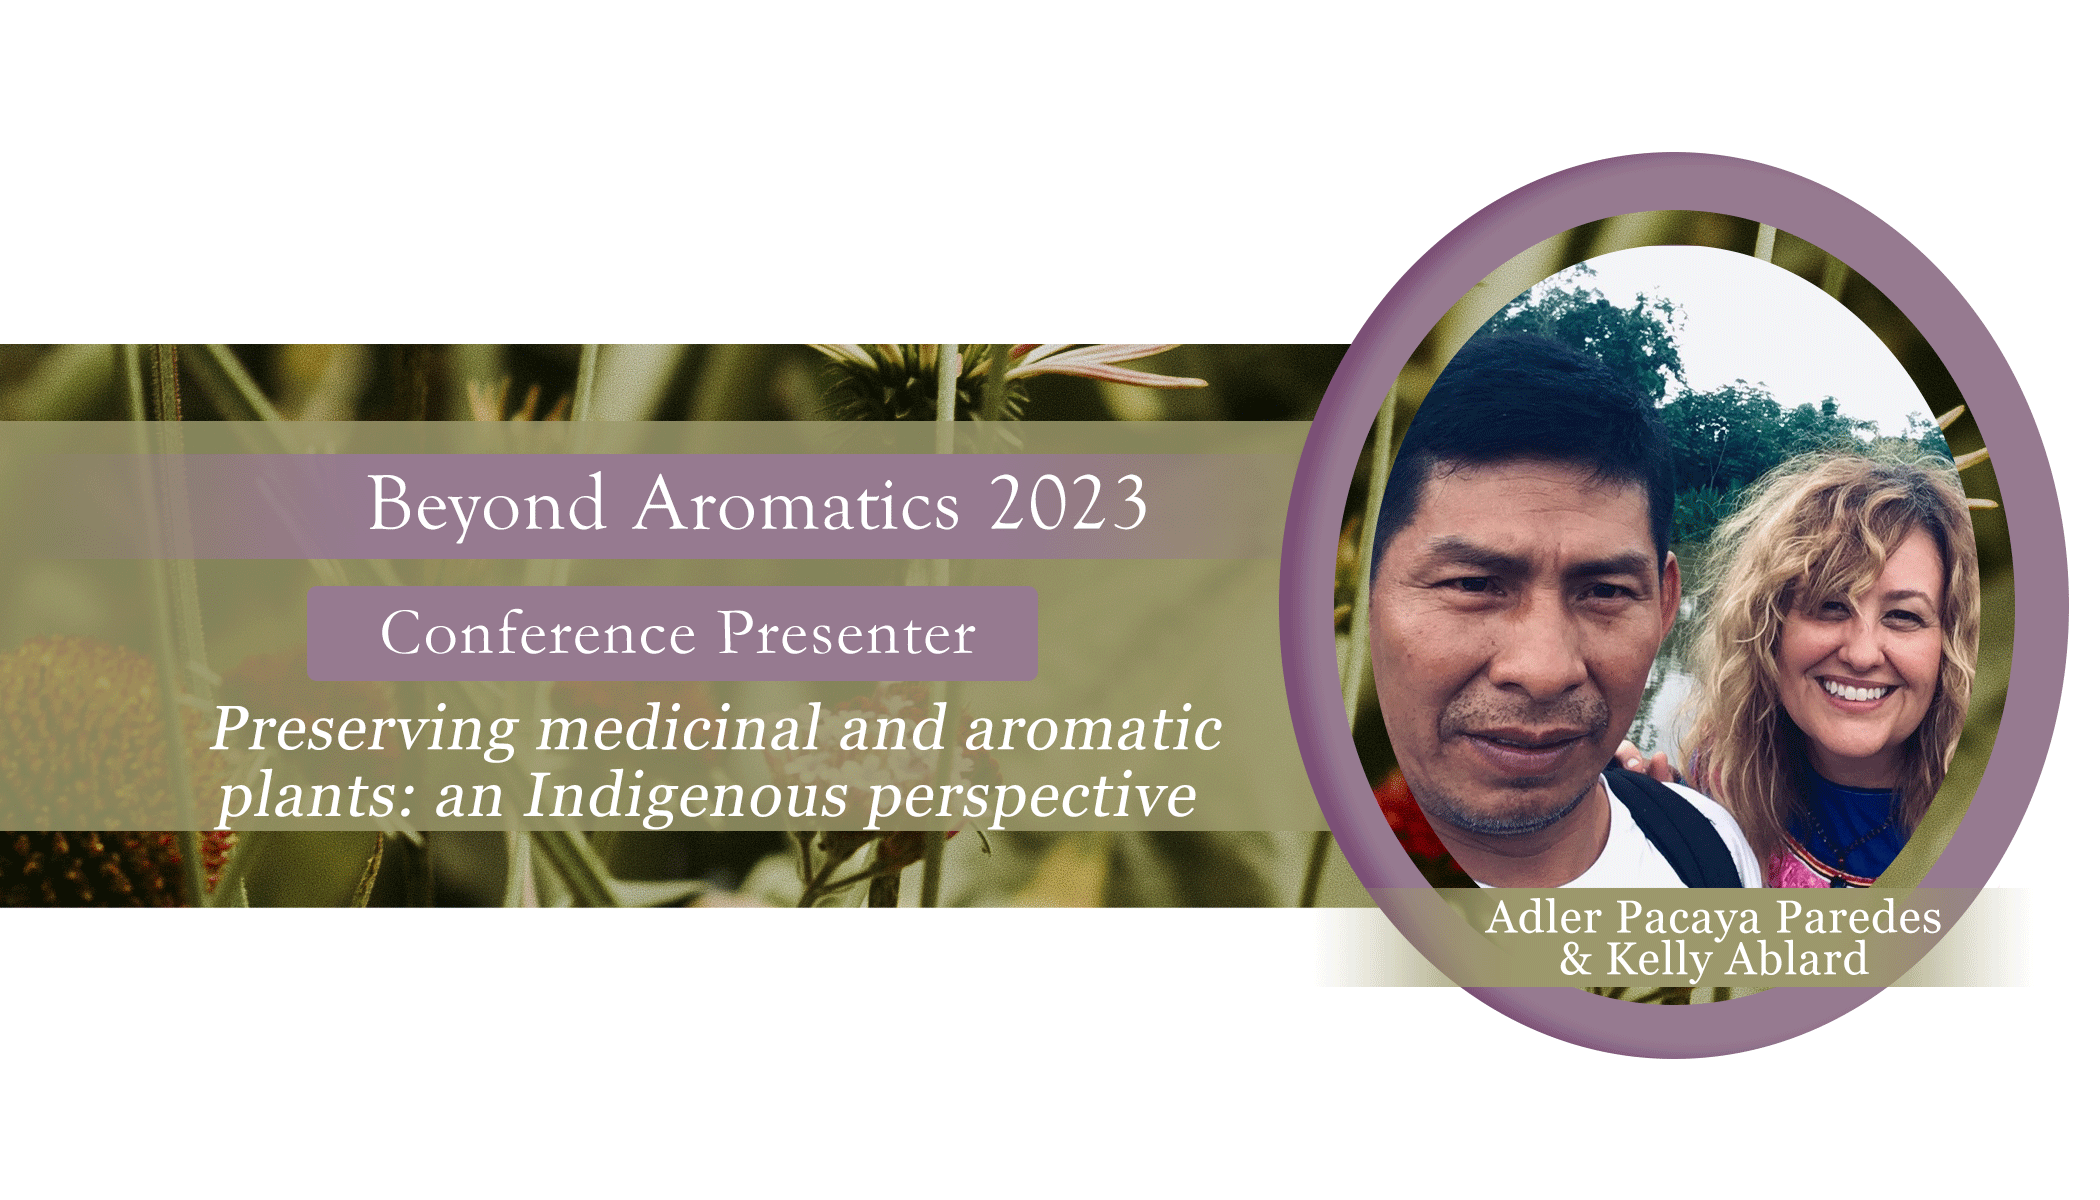 Preserving medicinal and aromatic plants: an Indigenous perspective